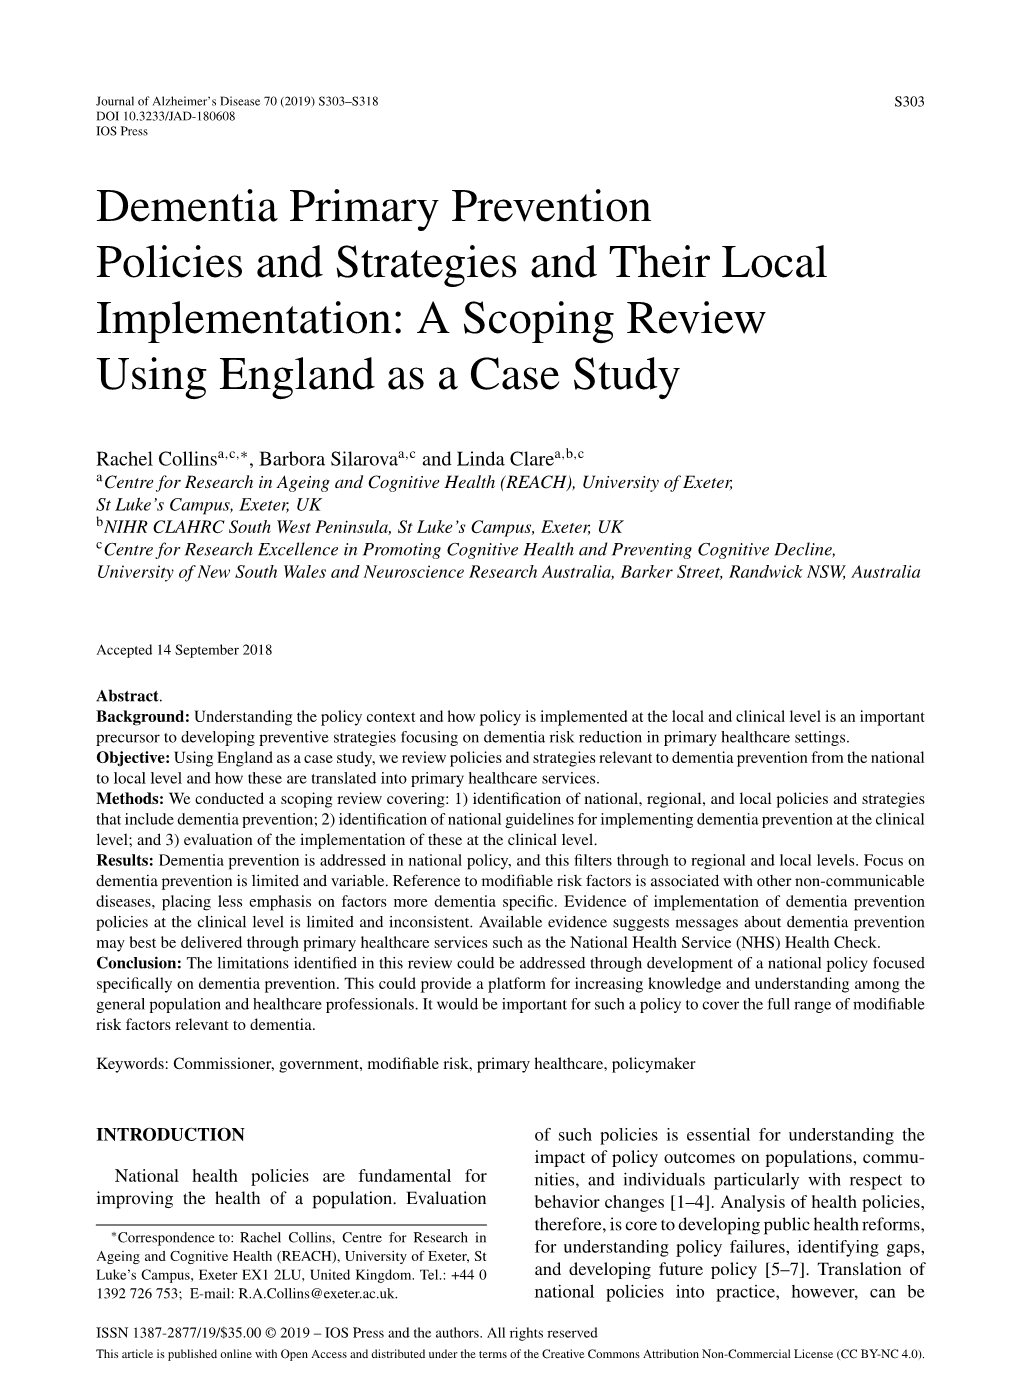 Dementia Primary Prevention Policies and Strategies and Their Local Implementation: a Scoping Review Using England As a Case Study